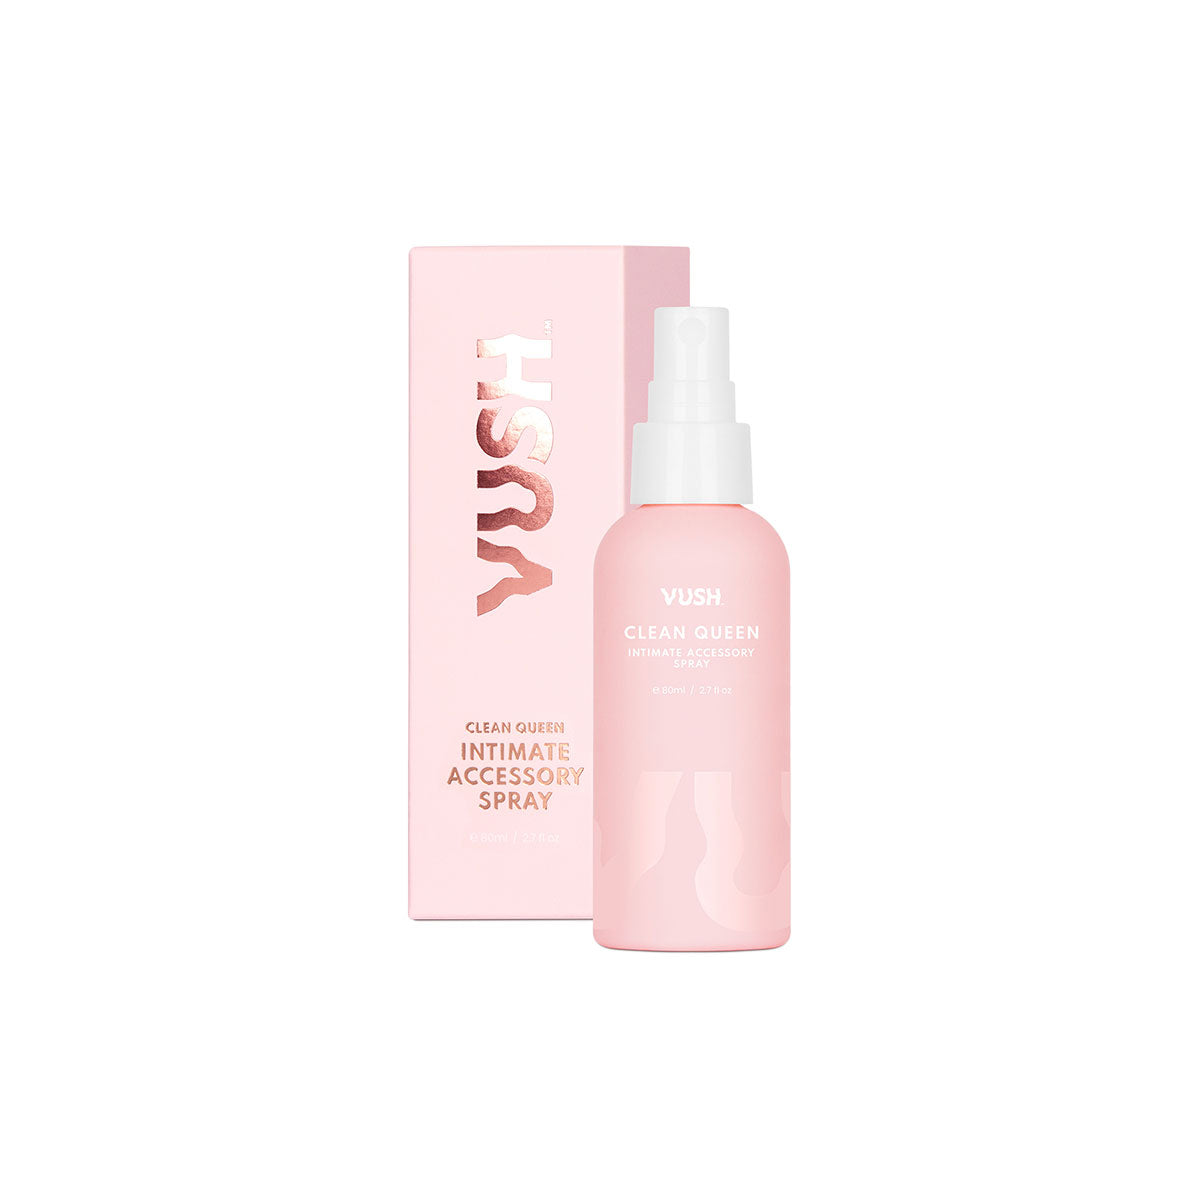 VUSH Clean Queen Intimate Accessory Spray 80ml Intimates Adult Boutique